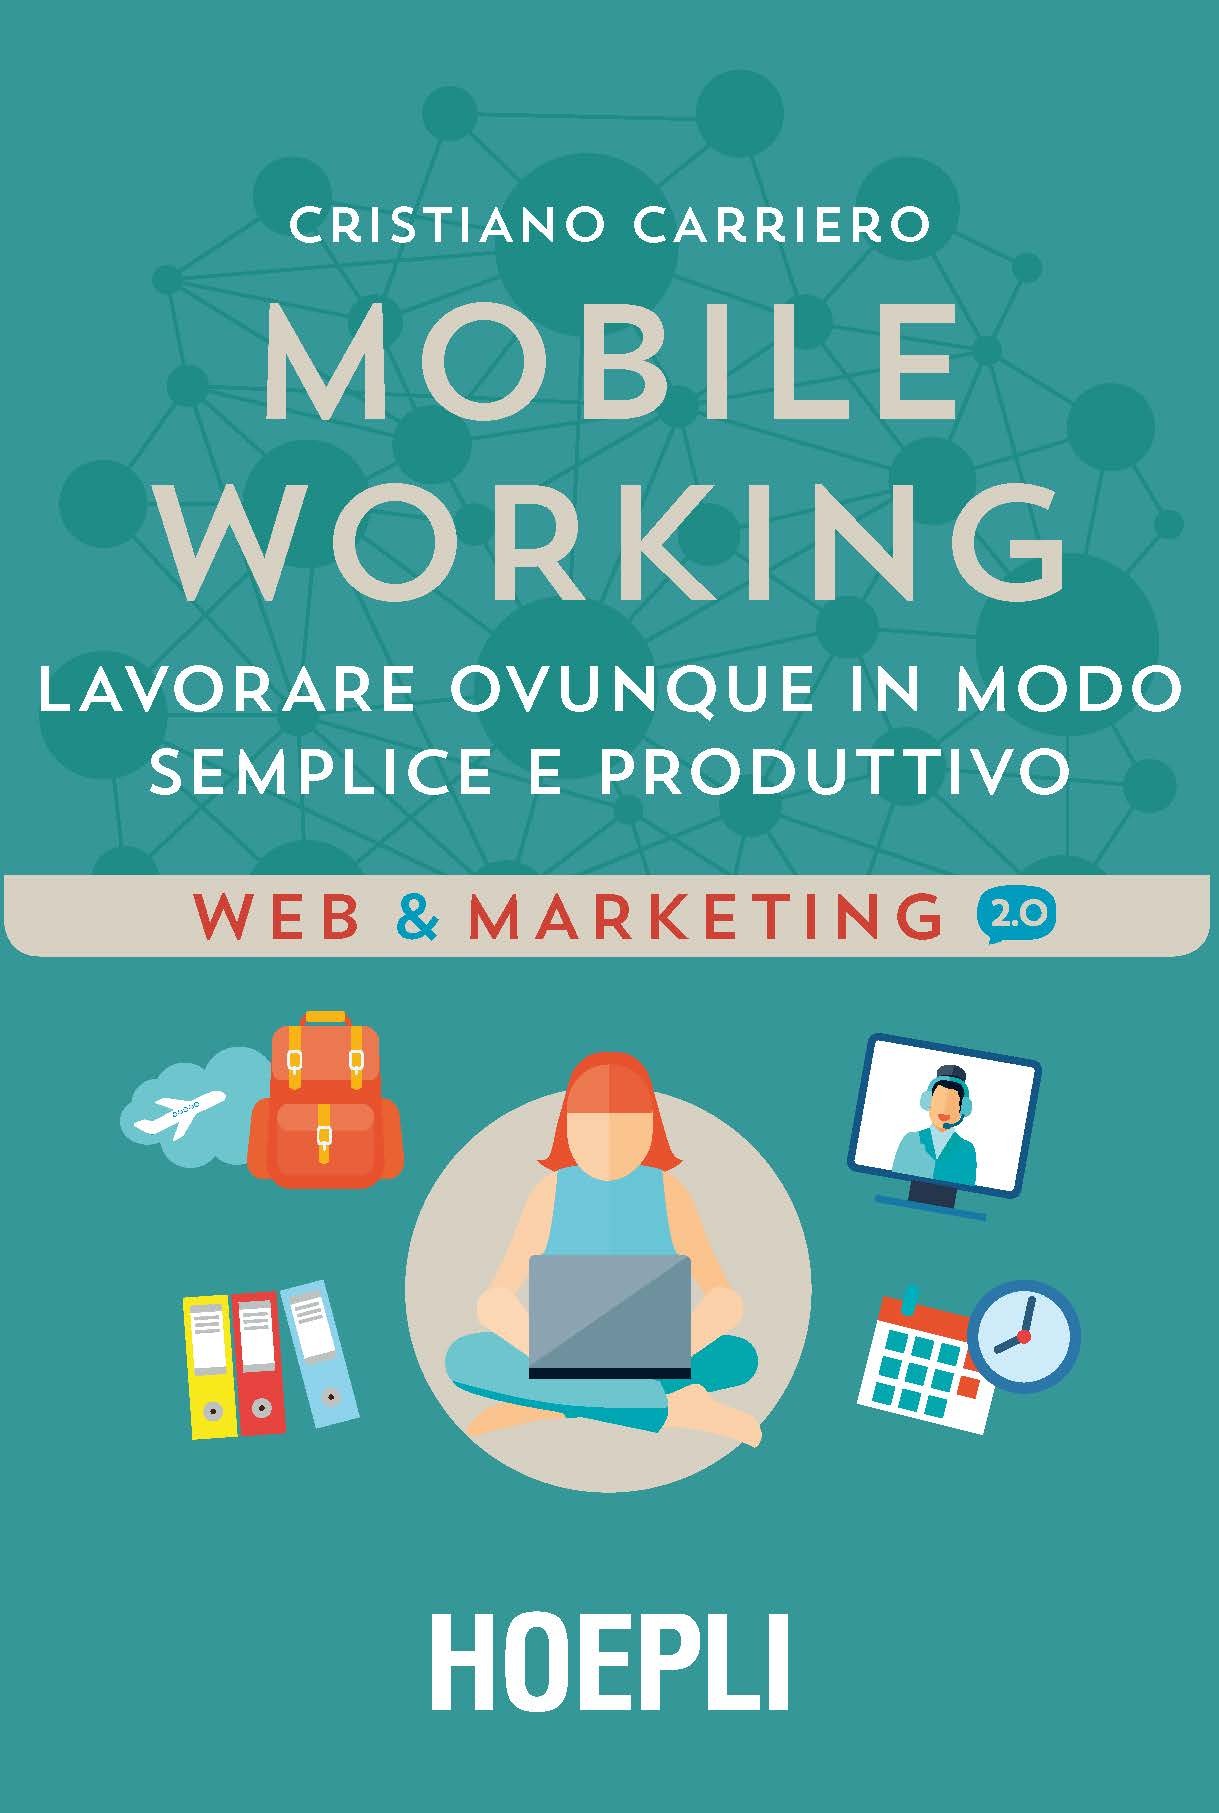 Mobile working - Librerie.coop